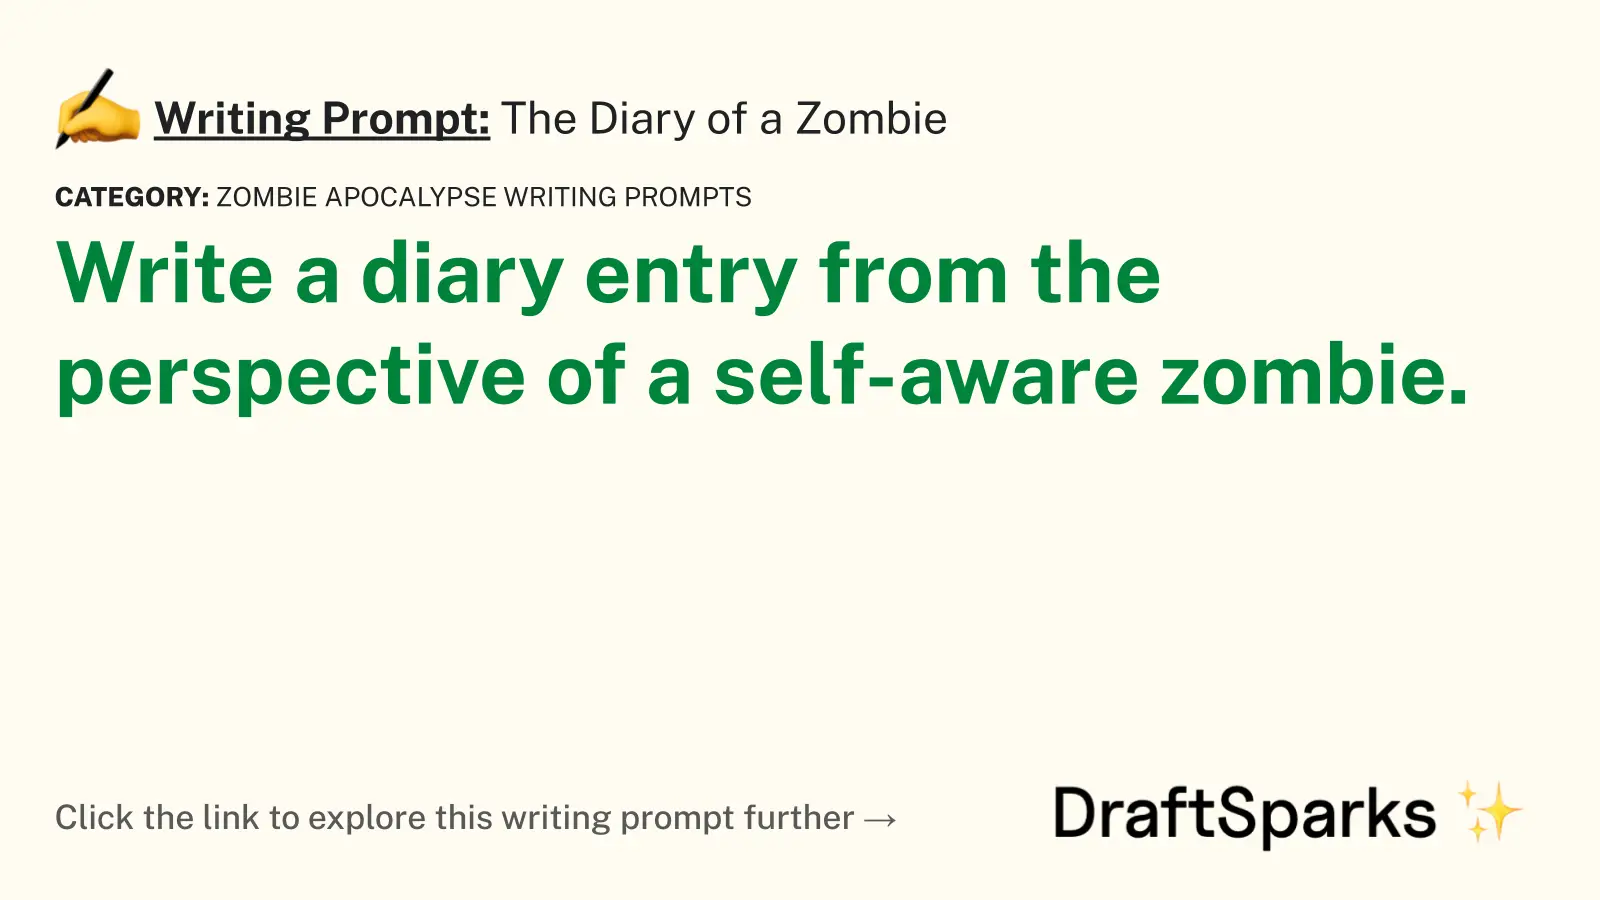 The Diary of a Zombie